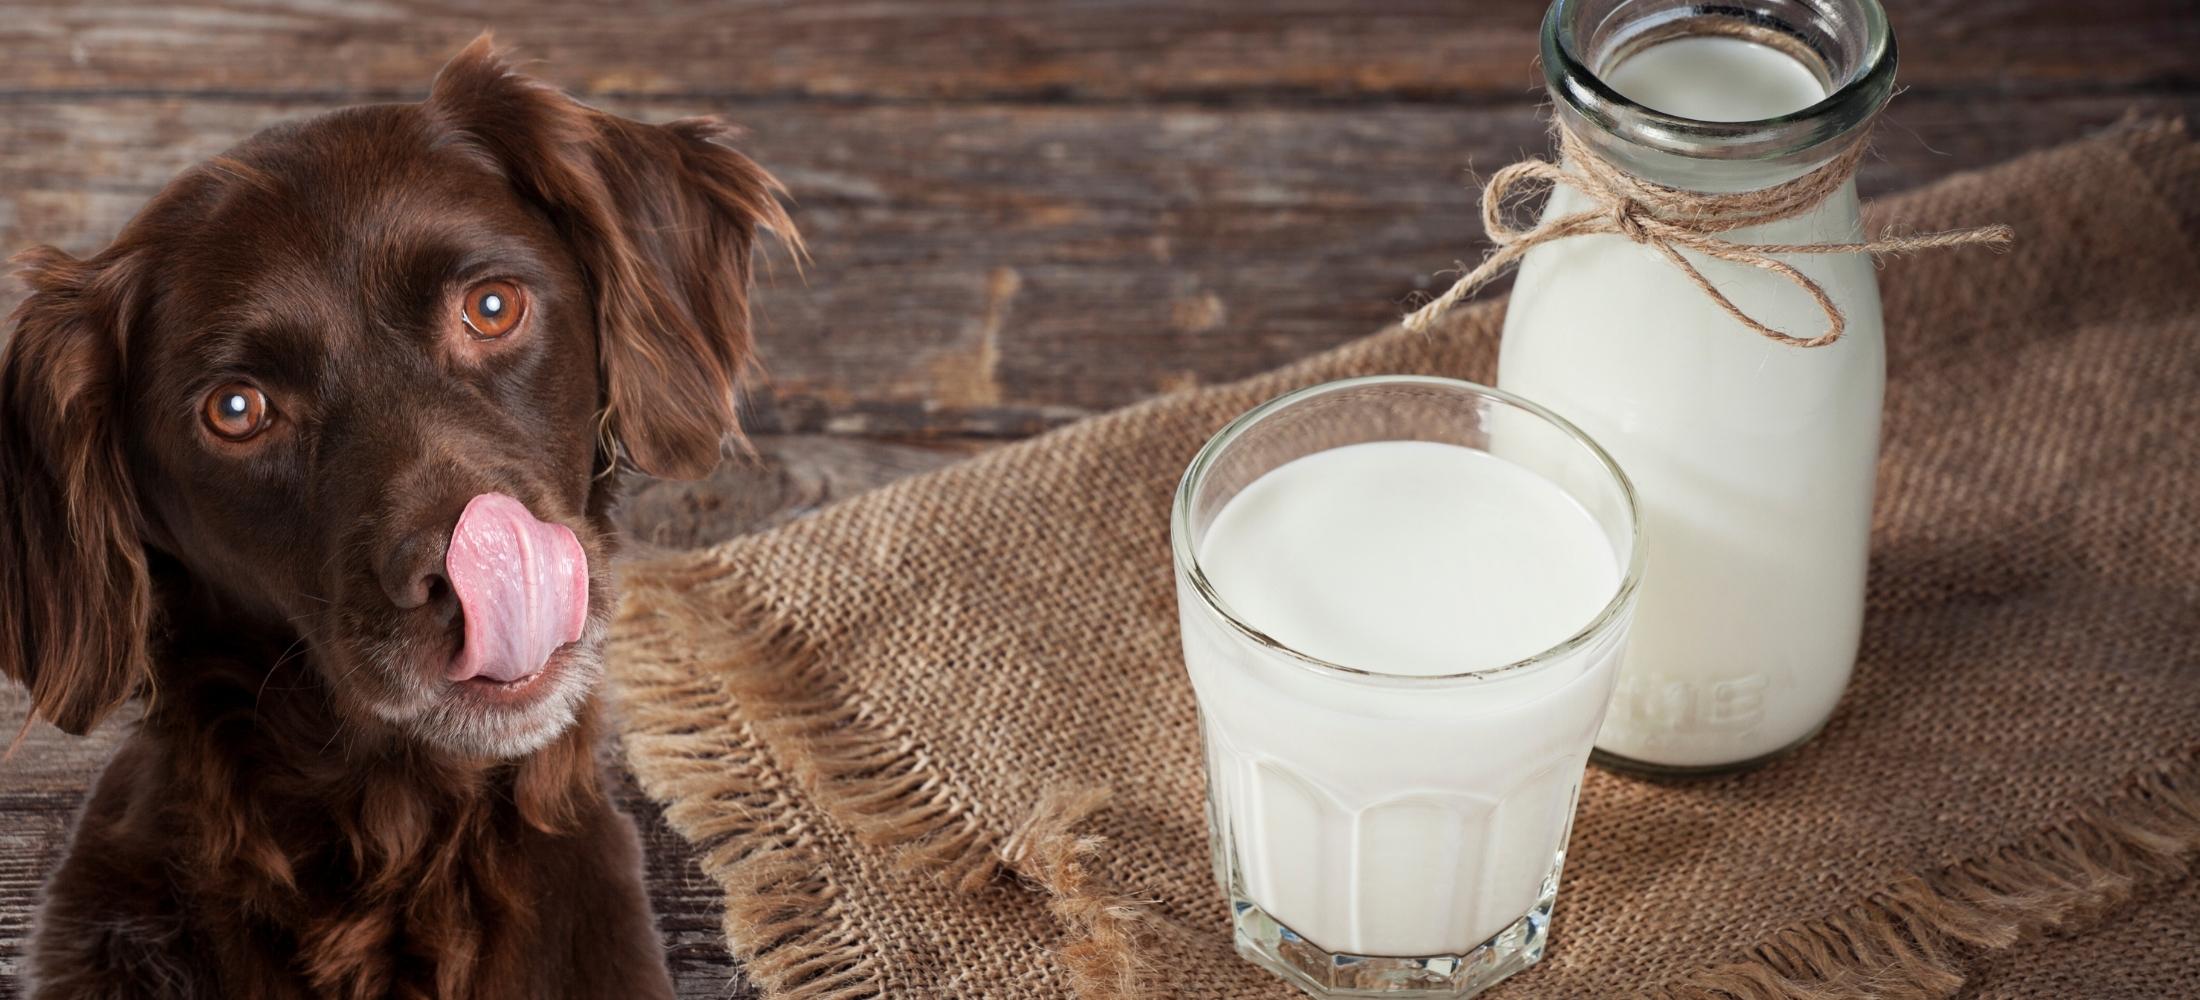 Cute dog with glass and bottle of probiotic-rich goat milk